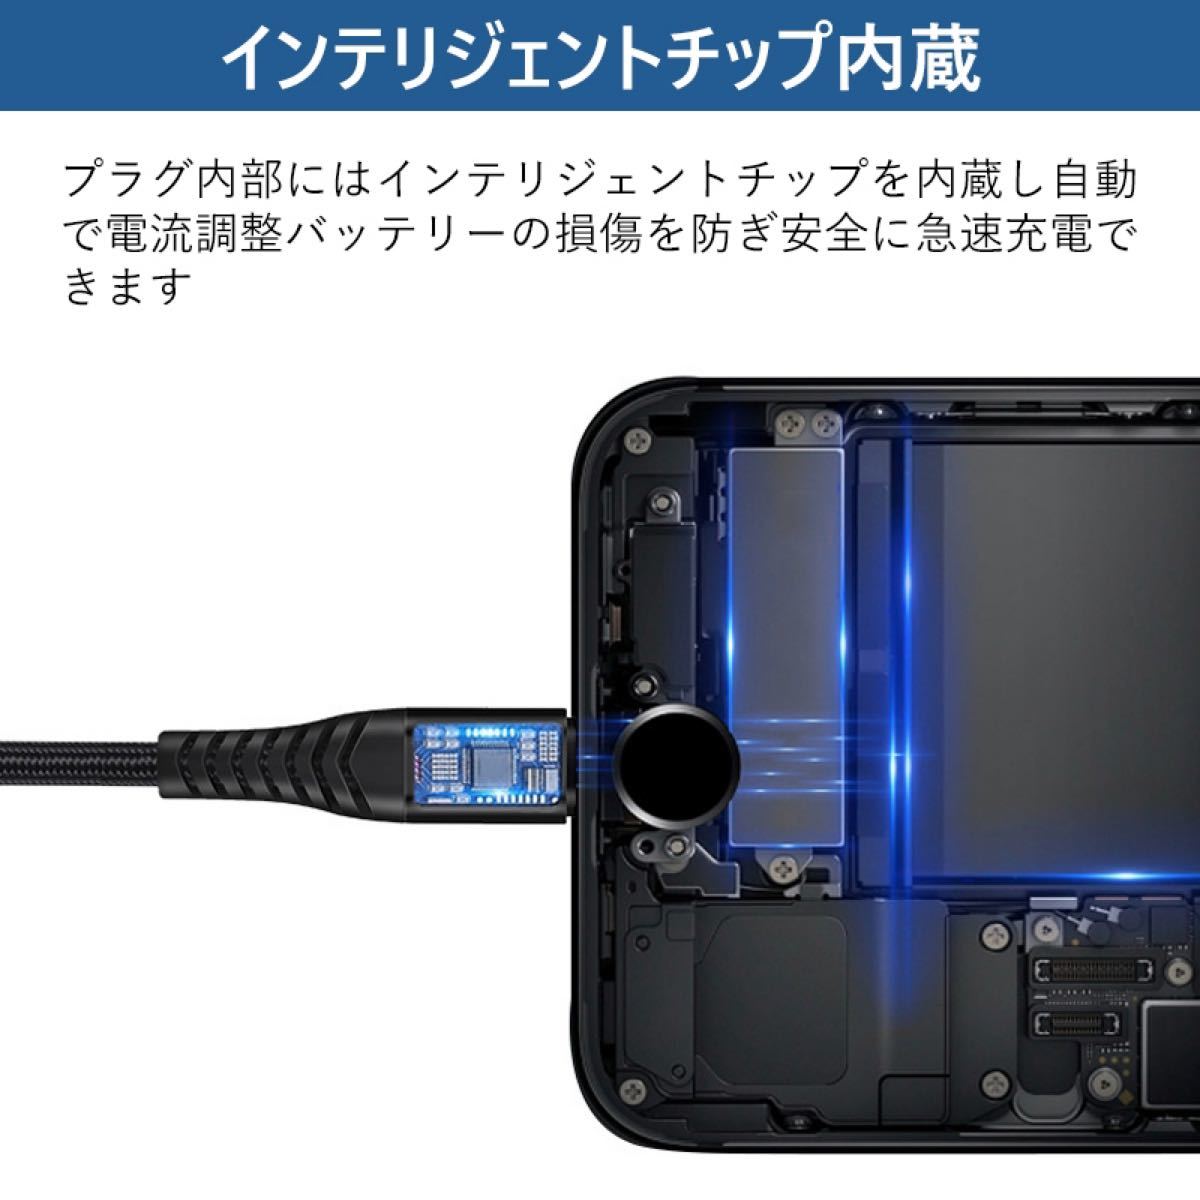 PD急速充電ケーブル Type-C to iPhone 20W/18W